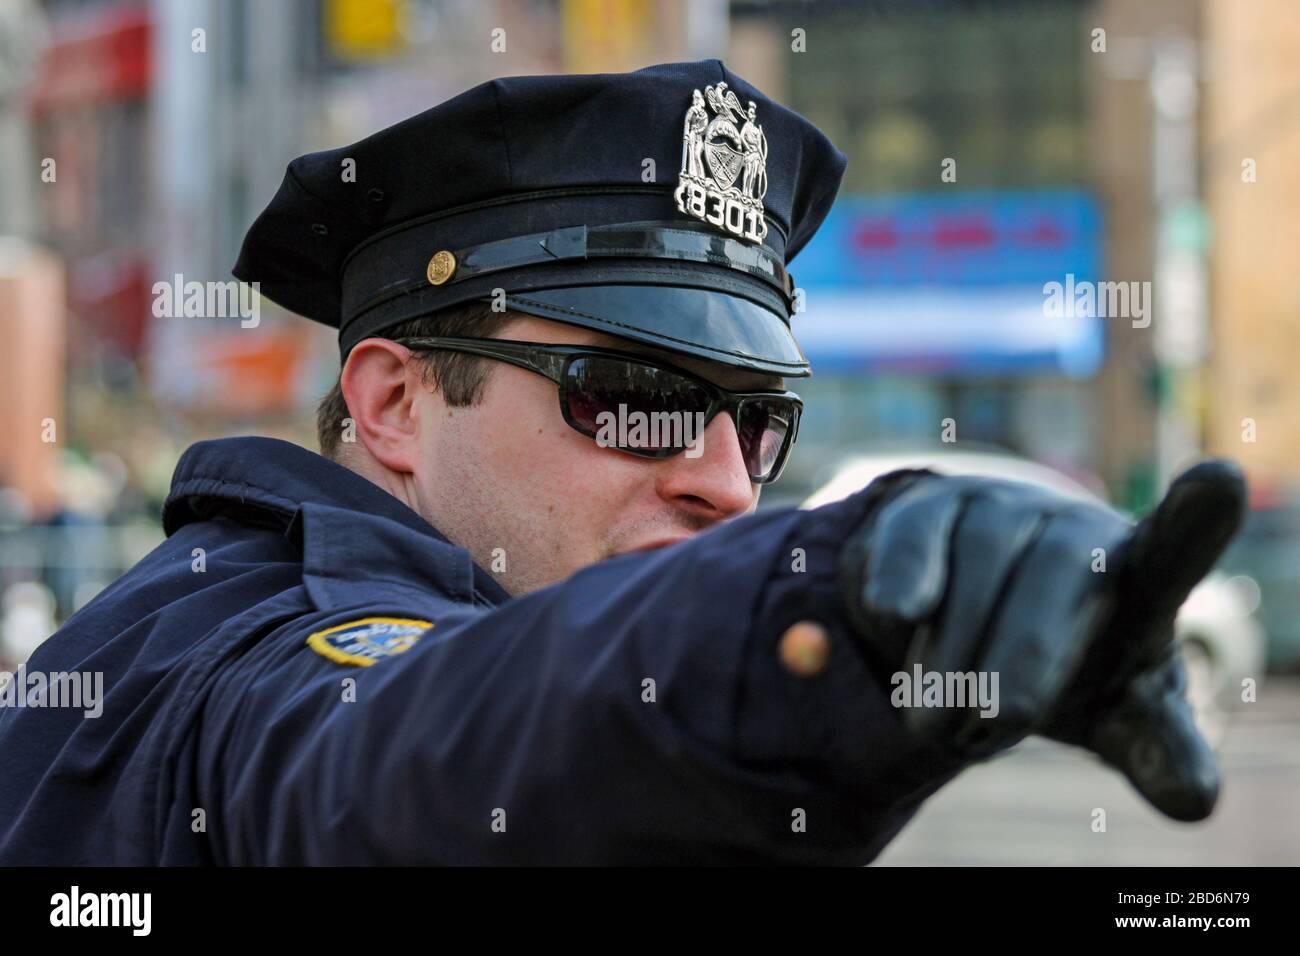 NYPD police officer with sunglasses and peaked cap pointing direction with his leather glove covered hand in Manhattan, New York City, United States Stock Photo